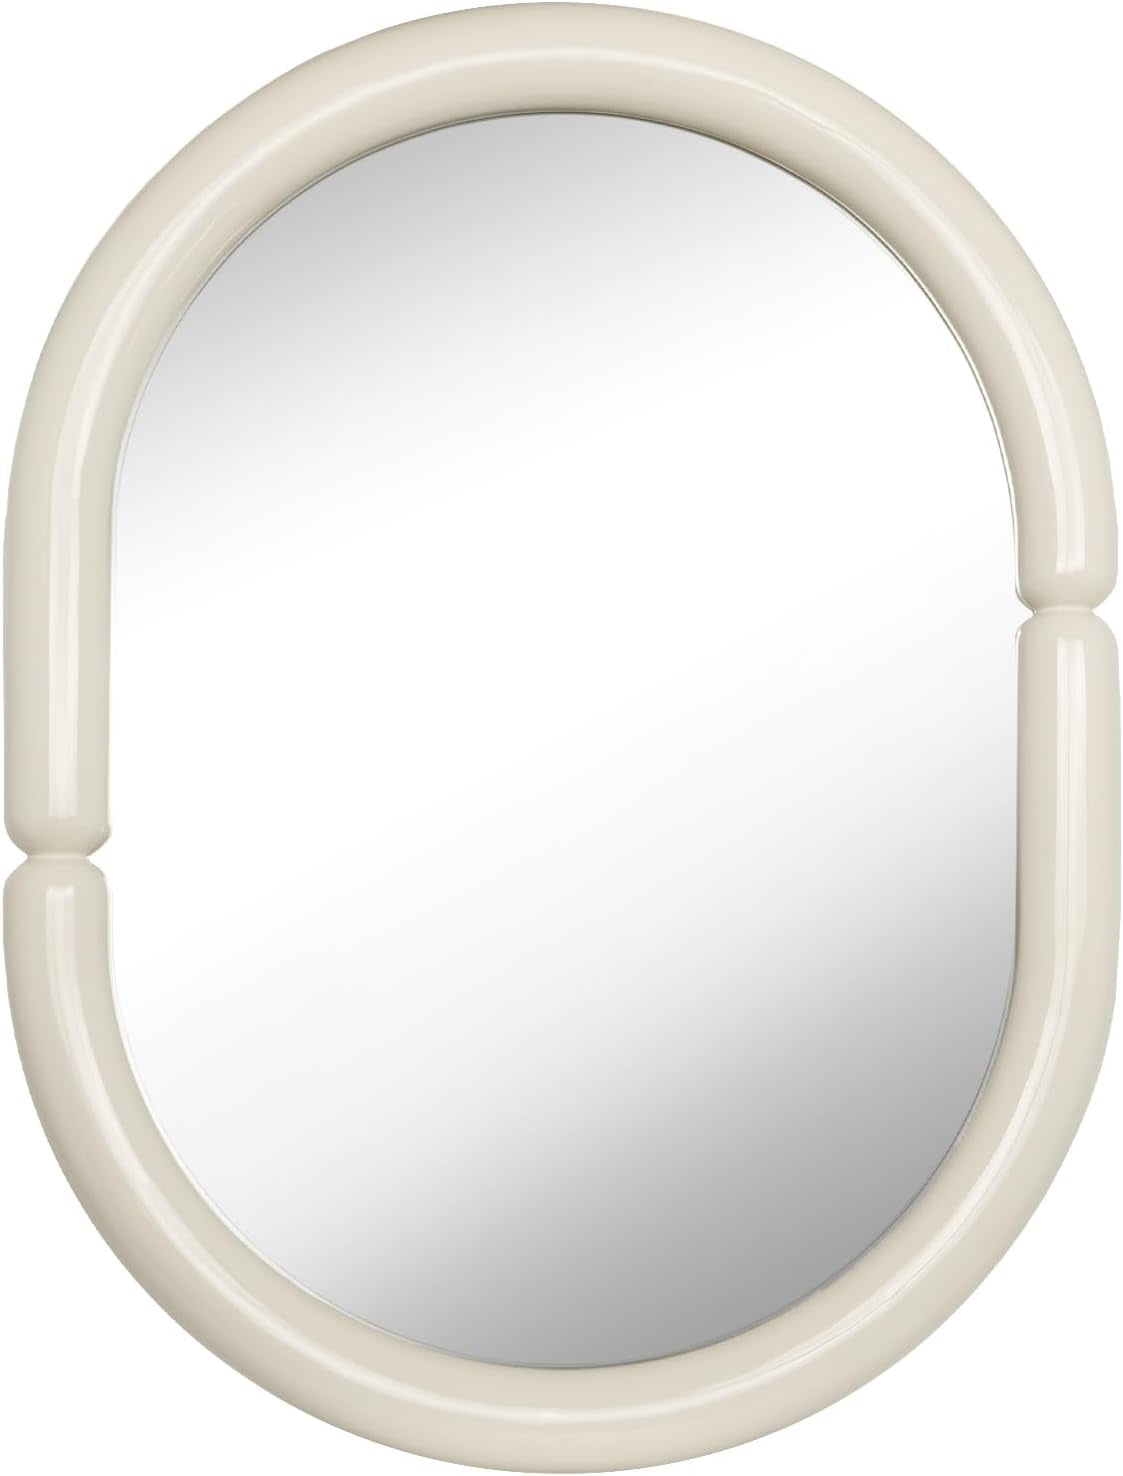 Contemporary Bagel-Shaped Wall Mirror with Candy-Colored Futuristic Design - 32'X23' Cream White